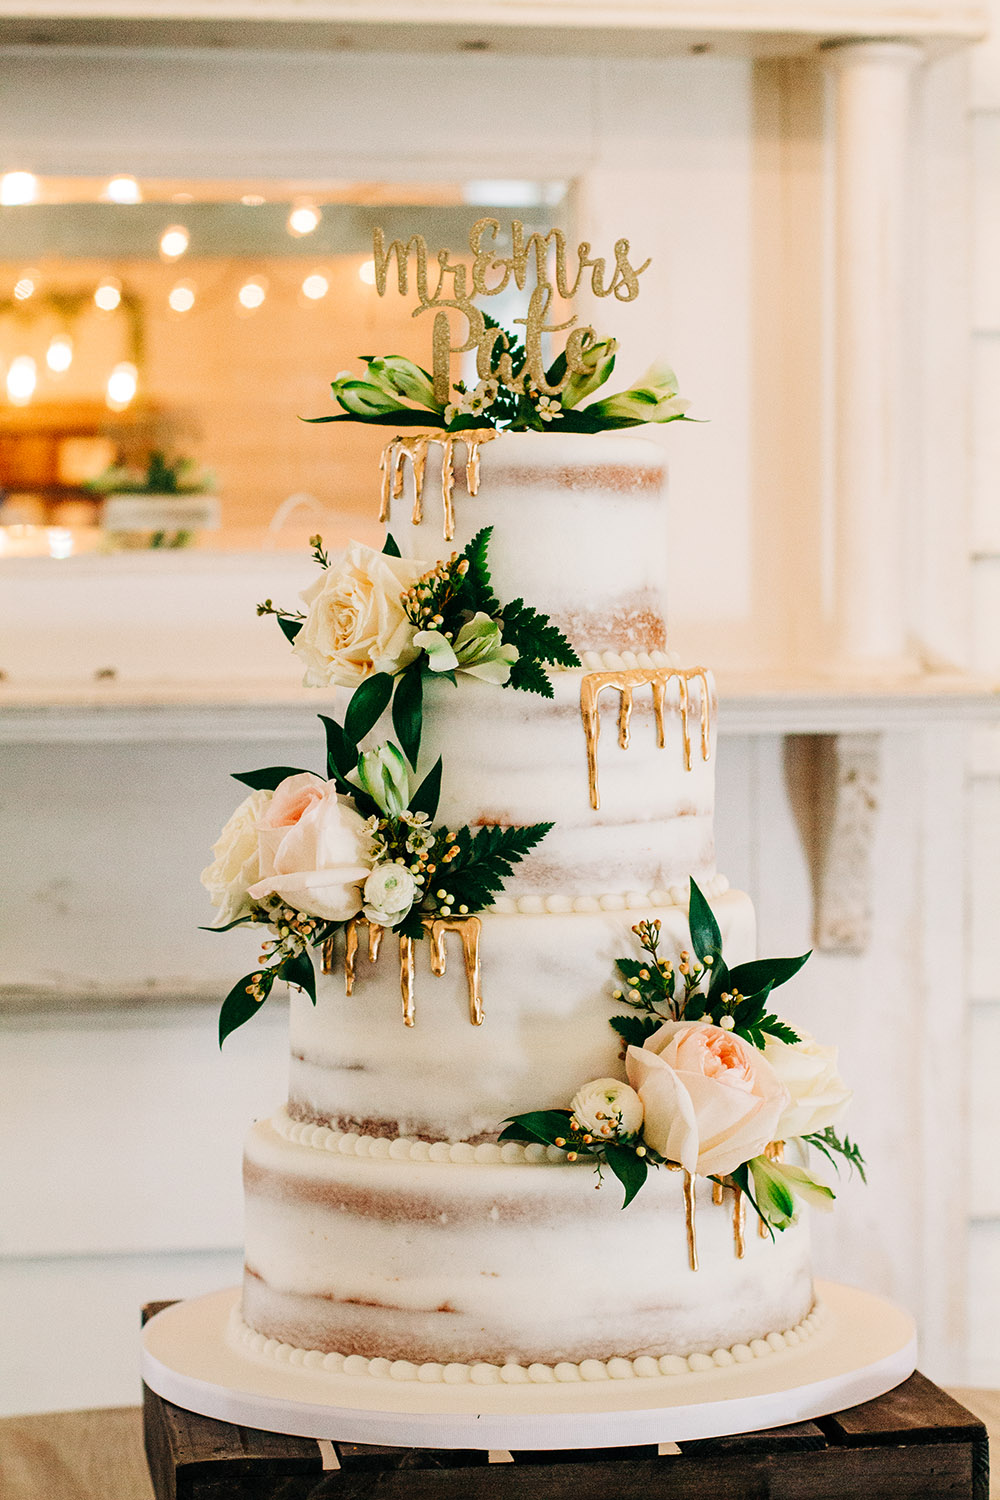 White "naked" cake with gold drip decoration and fresh flowers by Kimbla's Cakes | Photo by : Twisted Eye Photos